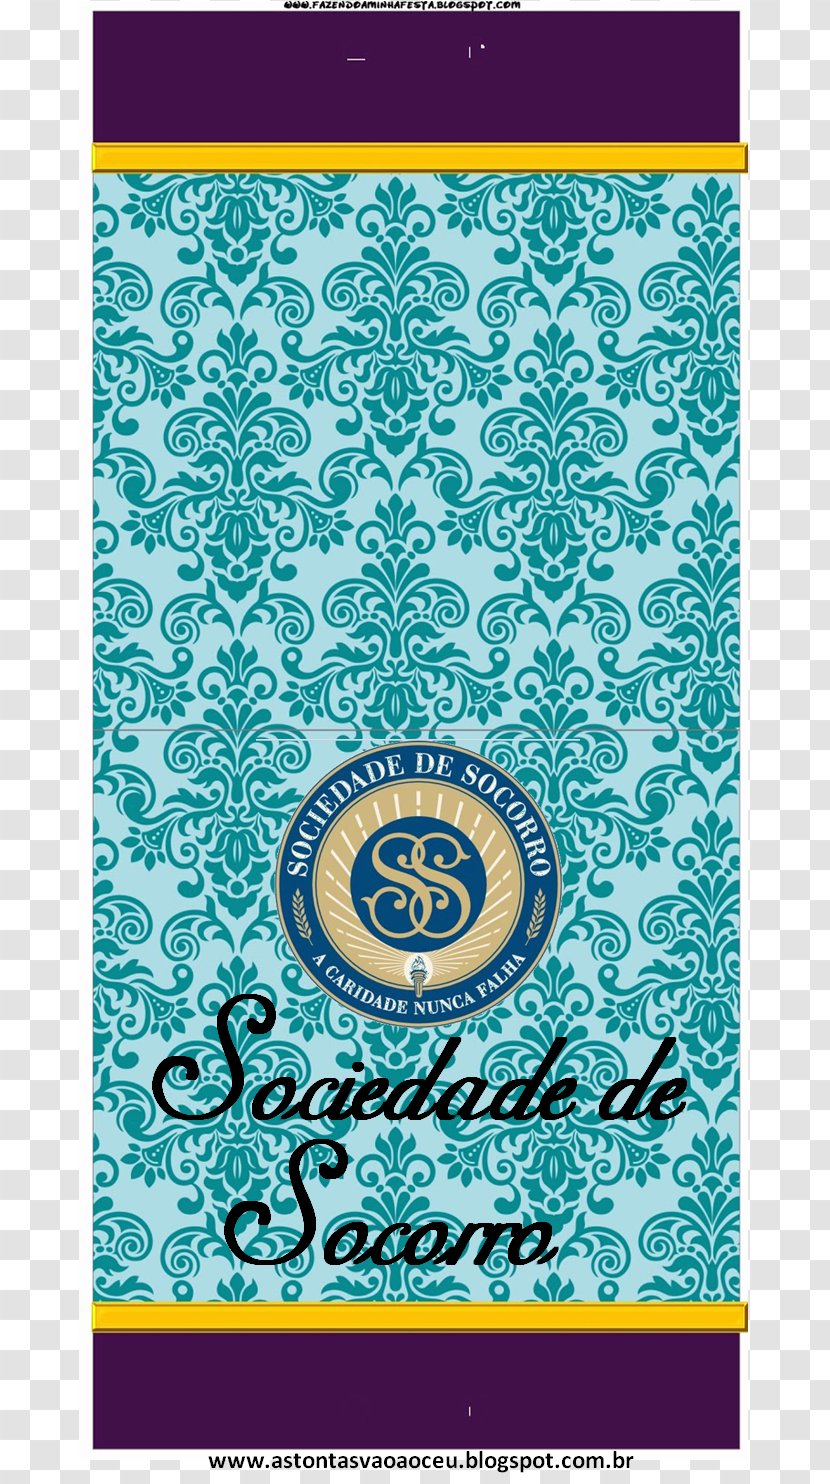 Book Of Mormon Relief Society The Church Jesus Christ Latter-day Saints Mormonism Campinas Brazil Temple Transparent PNG